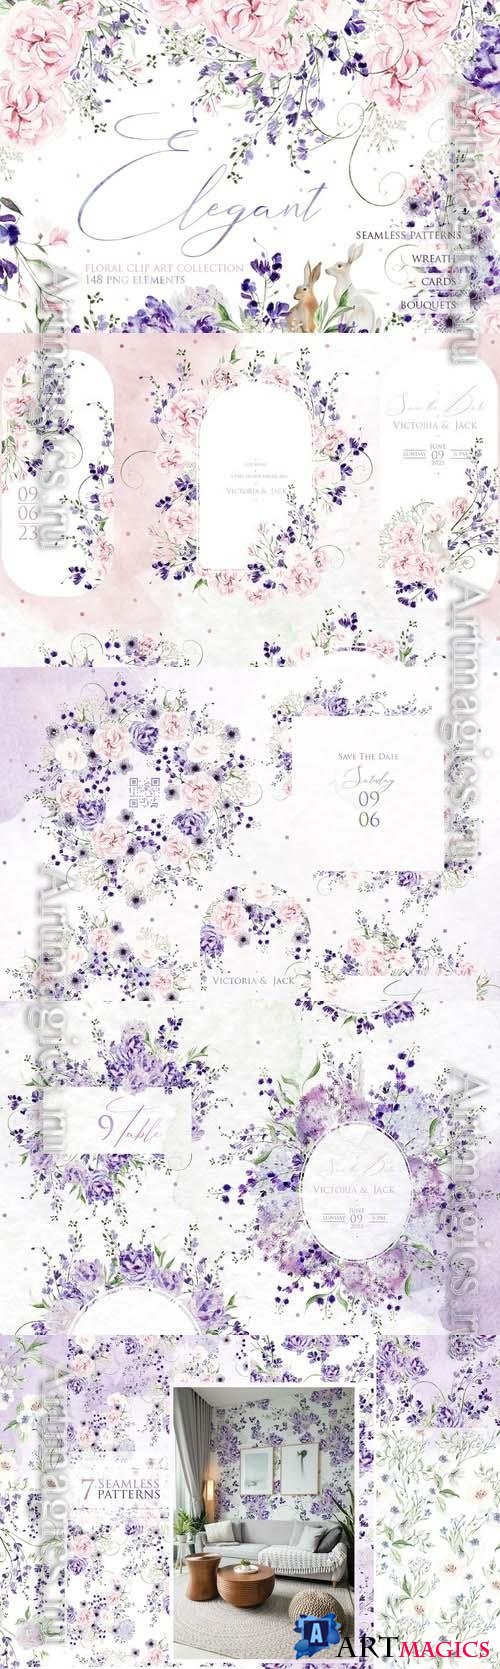 Beautiful Wedding Collection, Design Elements for Invitations